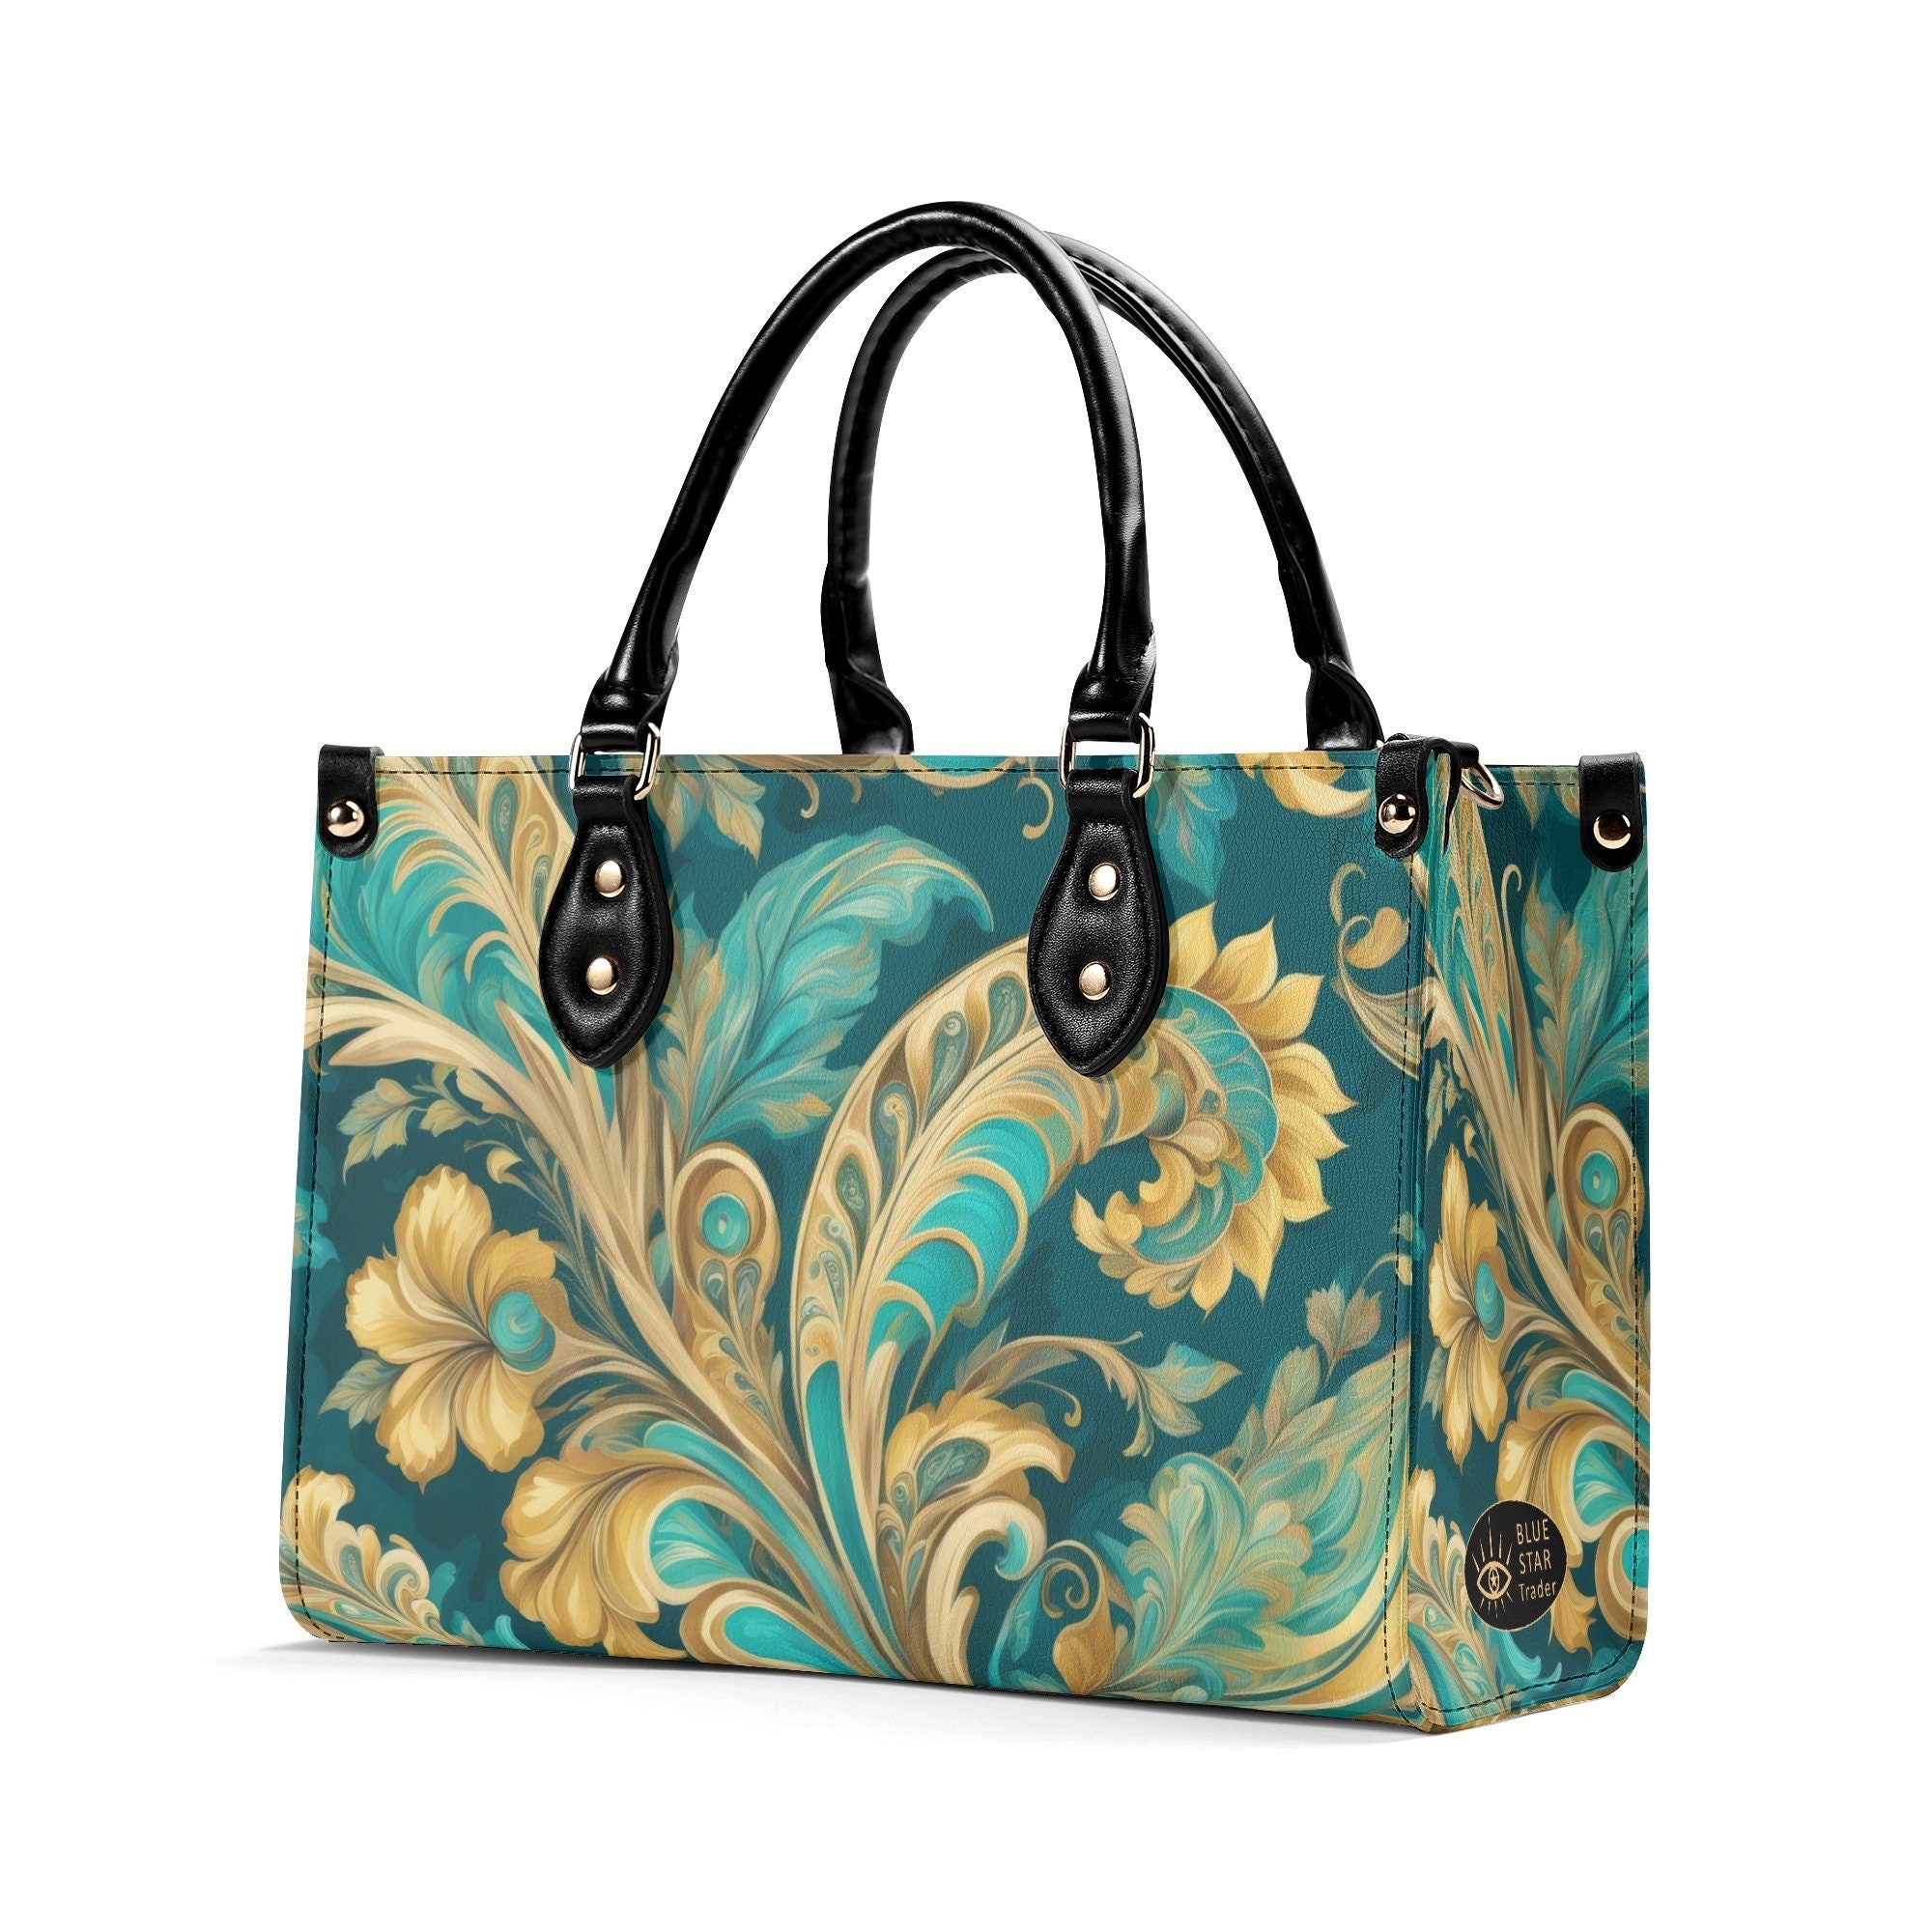 Turquoise Tapestry Paisley Tote Purse, Blue Green Unique Abstract Handbag Vegan Leather